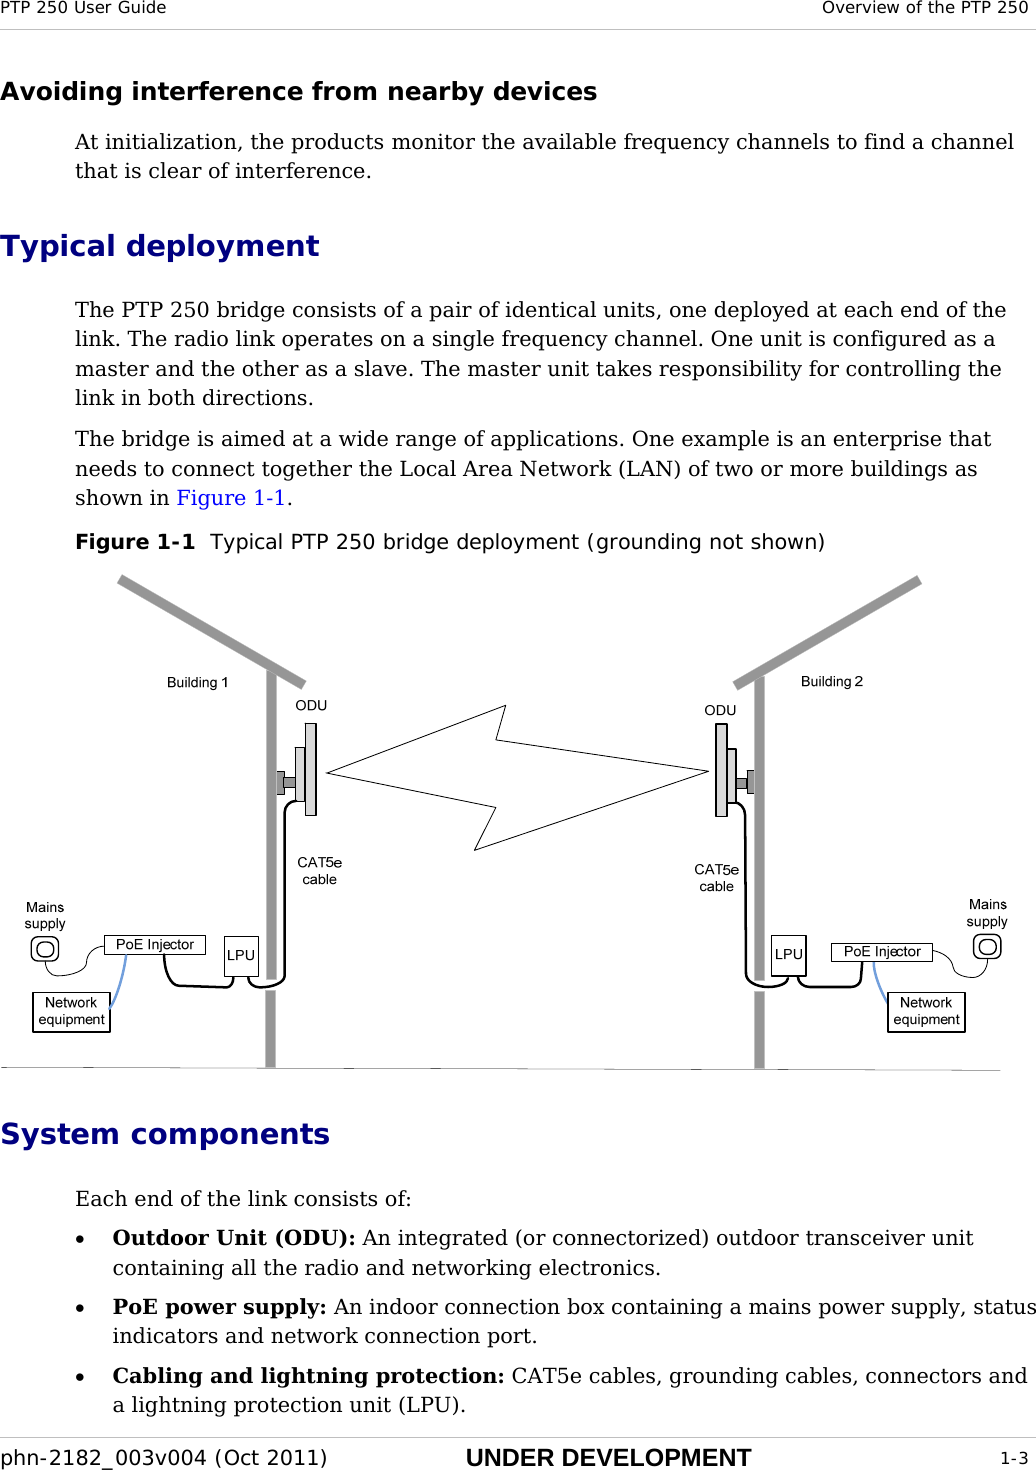 PTP 250 User Guide  Overview of the PTP 250  phn-2182_003v004 (Oct 2011)  UNDER DEVELOPMENT  1-3  Avoiding interference from nearby devices At initialization, the products monitor the available frequency channels to find a channel that is clear of interference.  Typical deployment The PTP 250 bridge consists of a pair of identical units, one deployed at each end of the link. The radio link operates on a single frequency channel. One unit is configured as a master and the other as a slave. The master unit takes responsibility for controlling the link in both directions. The bridge is aimed at a wide range of applications. One example is an enterprise that needs to connect together the Local Area Network (LAN) of two or more buildings as shown in Figure 1-1.  Figure 1-1  Typical PTP 250 bridge deployment (grounding not shown)  System components Each end of the link consists of: • Outdoor Unit (ODU): An integrated (or connectorized) outdoor transceiver unit containing all the radio and networking electronics. • PoE power supply: An indoor connection box containing a mains power supply, status indicators and network connection port. • Cabling and lightning protection: CAT5e cables, grounding cables, connectors and a lightning protection unit (LPU). 